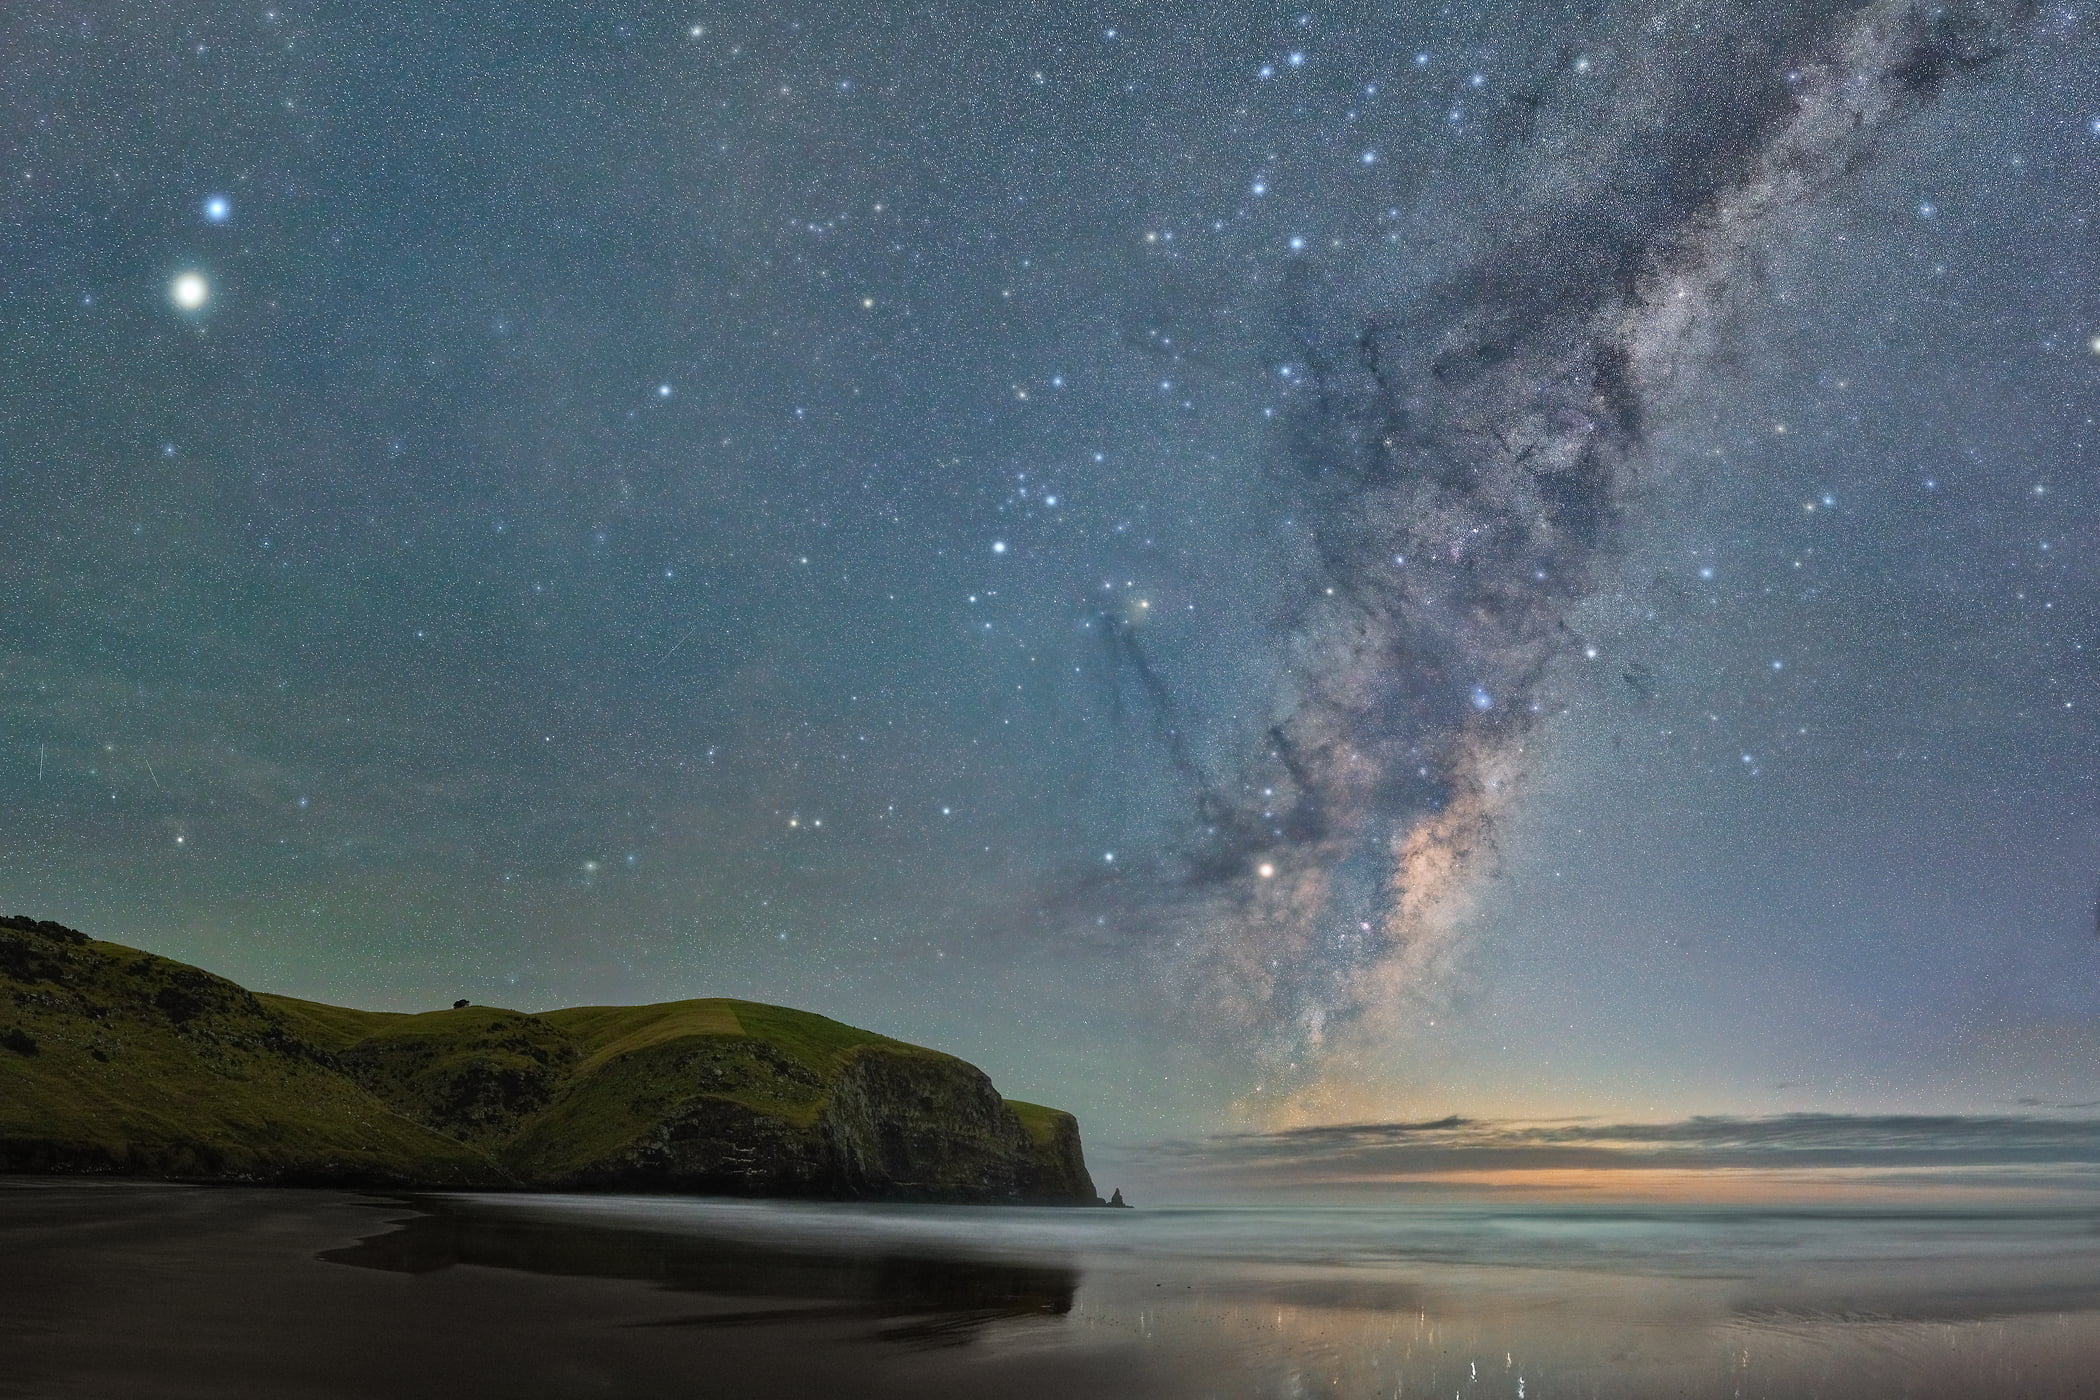 357 megapixels! A very high resolution, large-format VAST photo of the Milky Way, stars, and night sky over a beach; fine art landscape astrophotograph created by astrophotographer Paul Wilson in Eastern Bays, Banks Peninsula, New Zealand